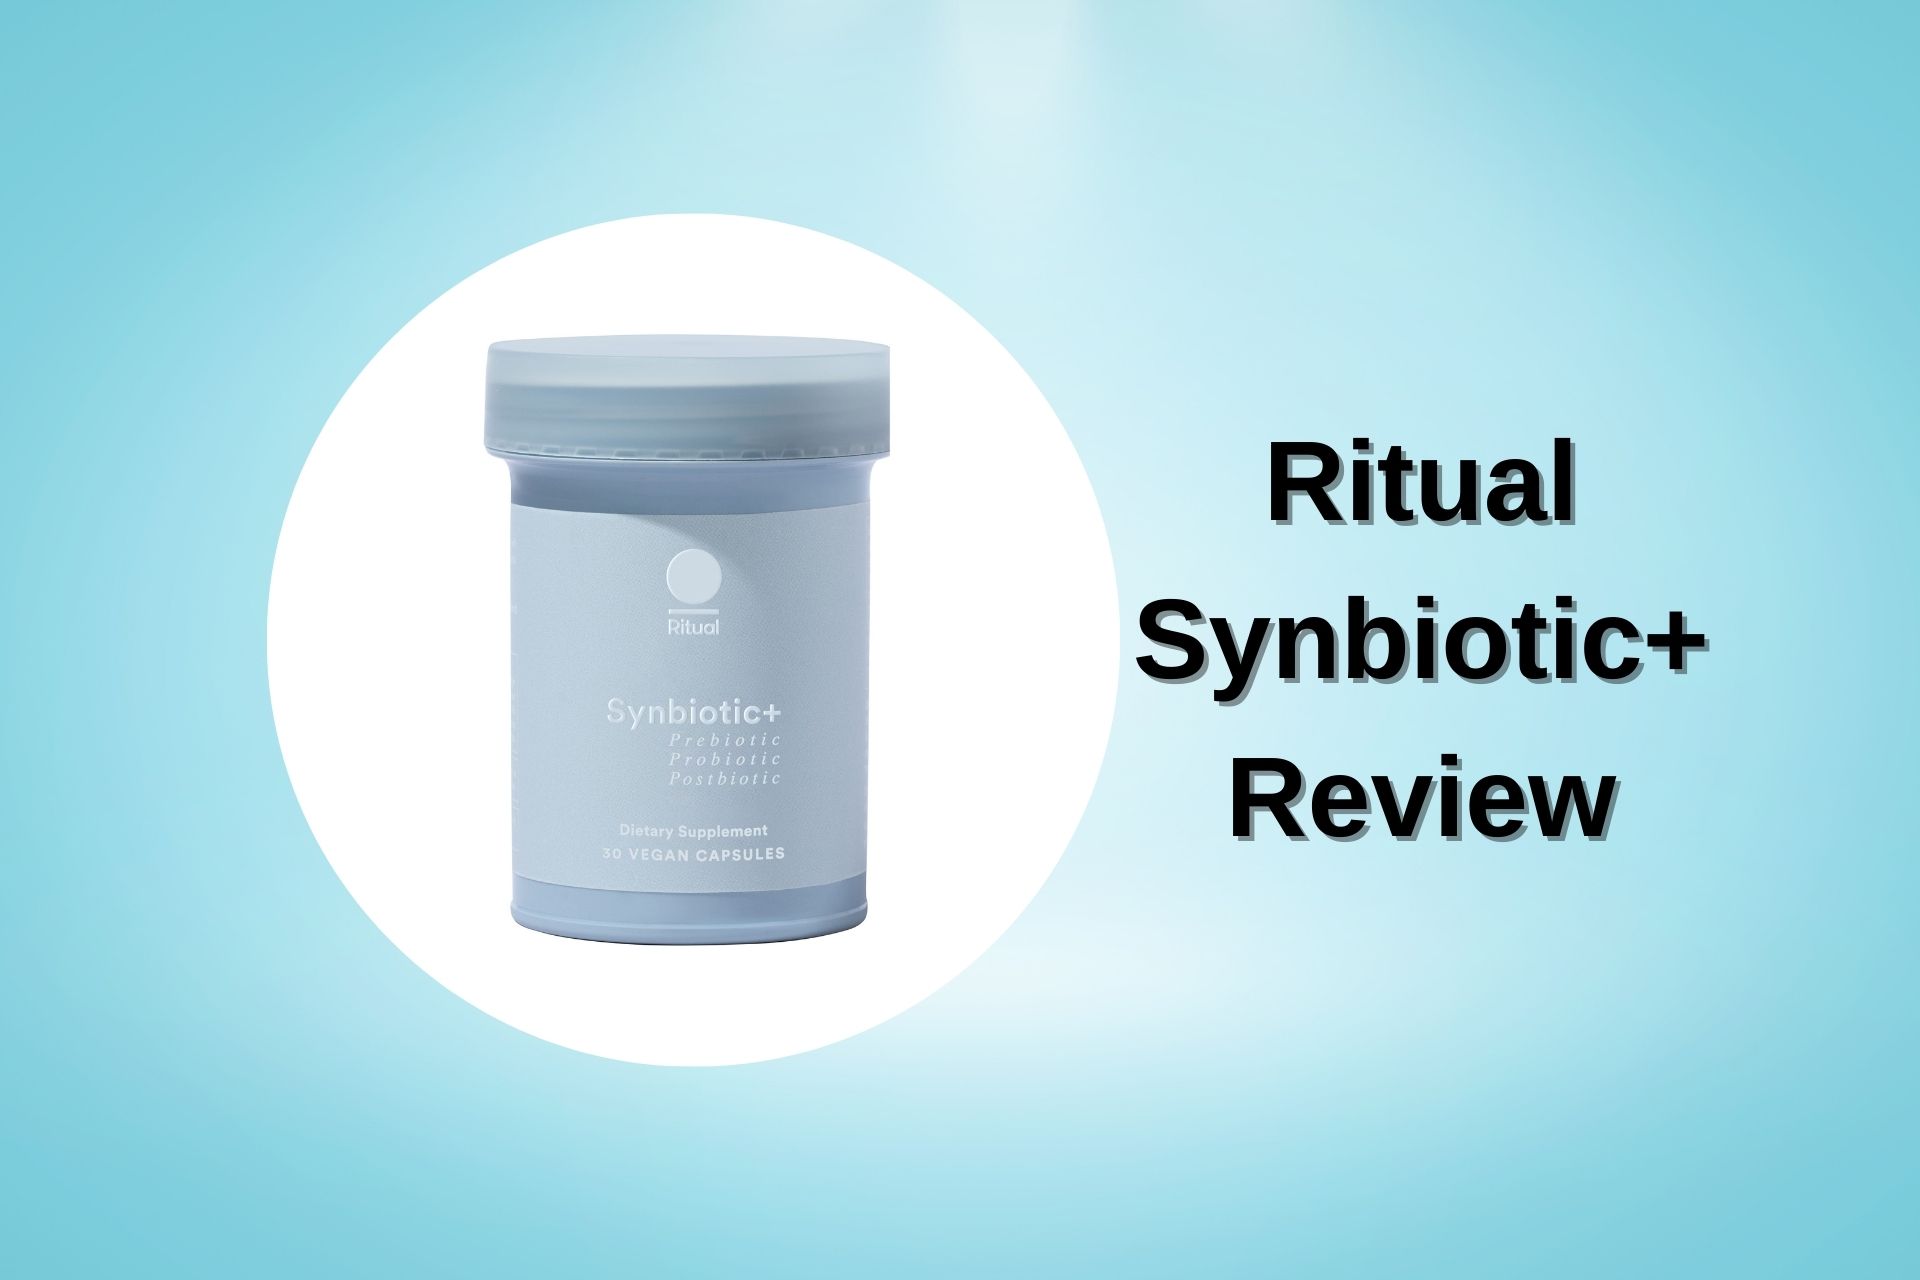 Ritual Synbiotic+ Review